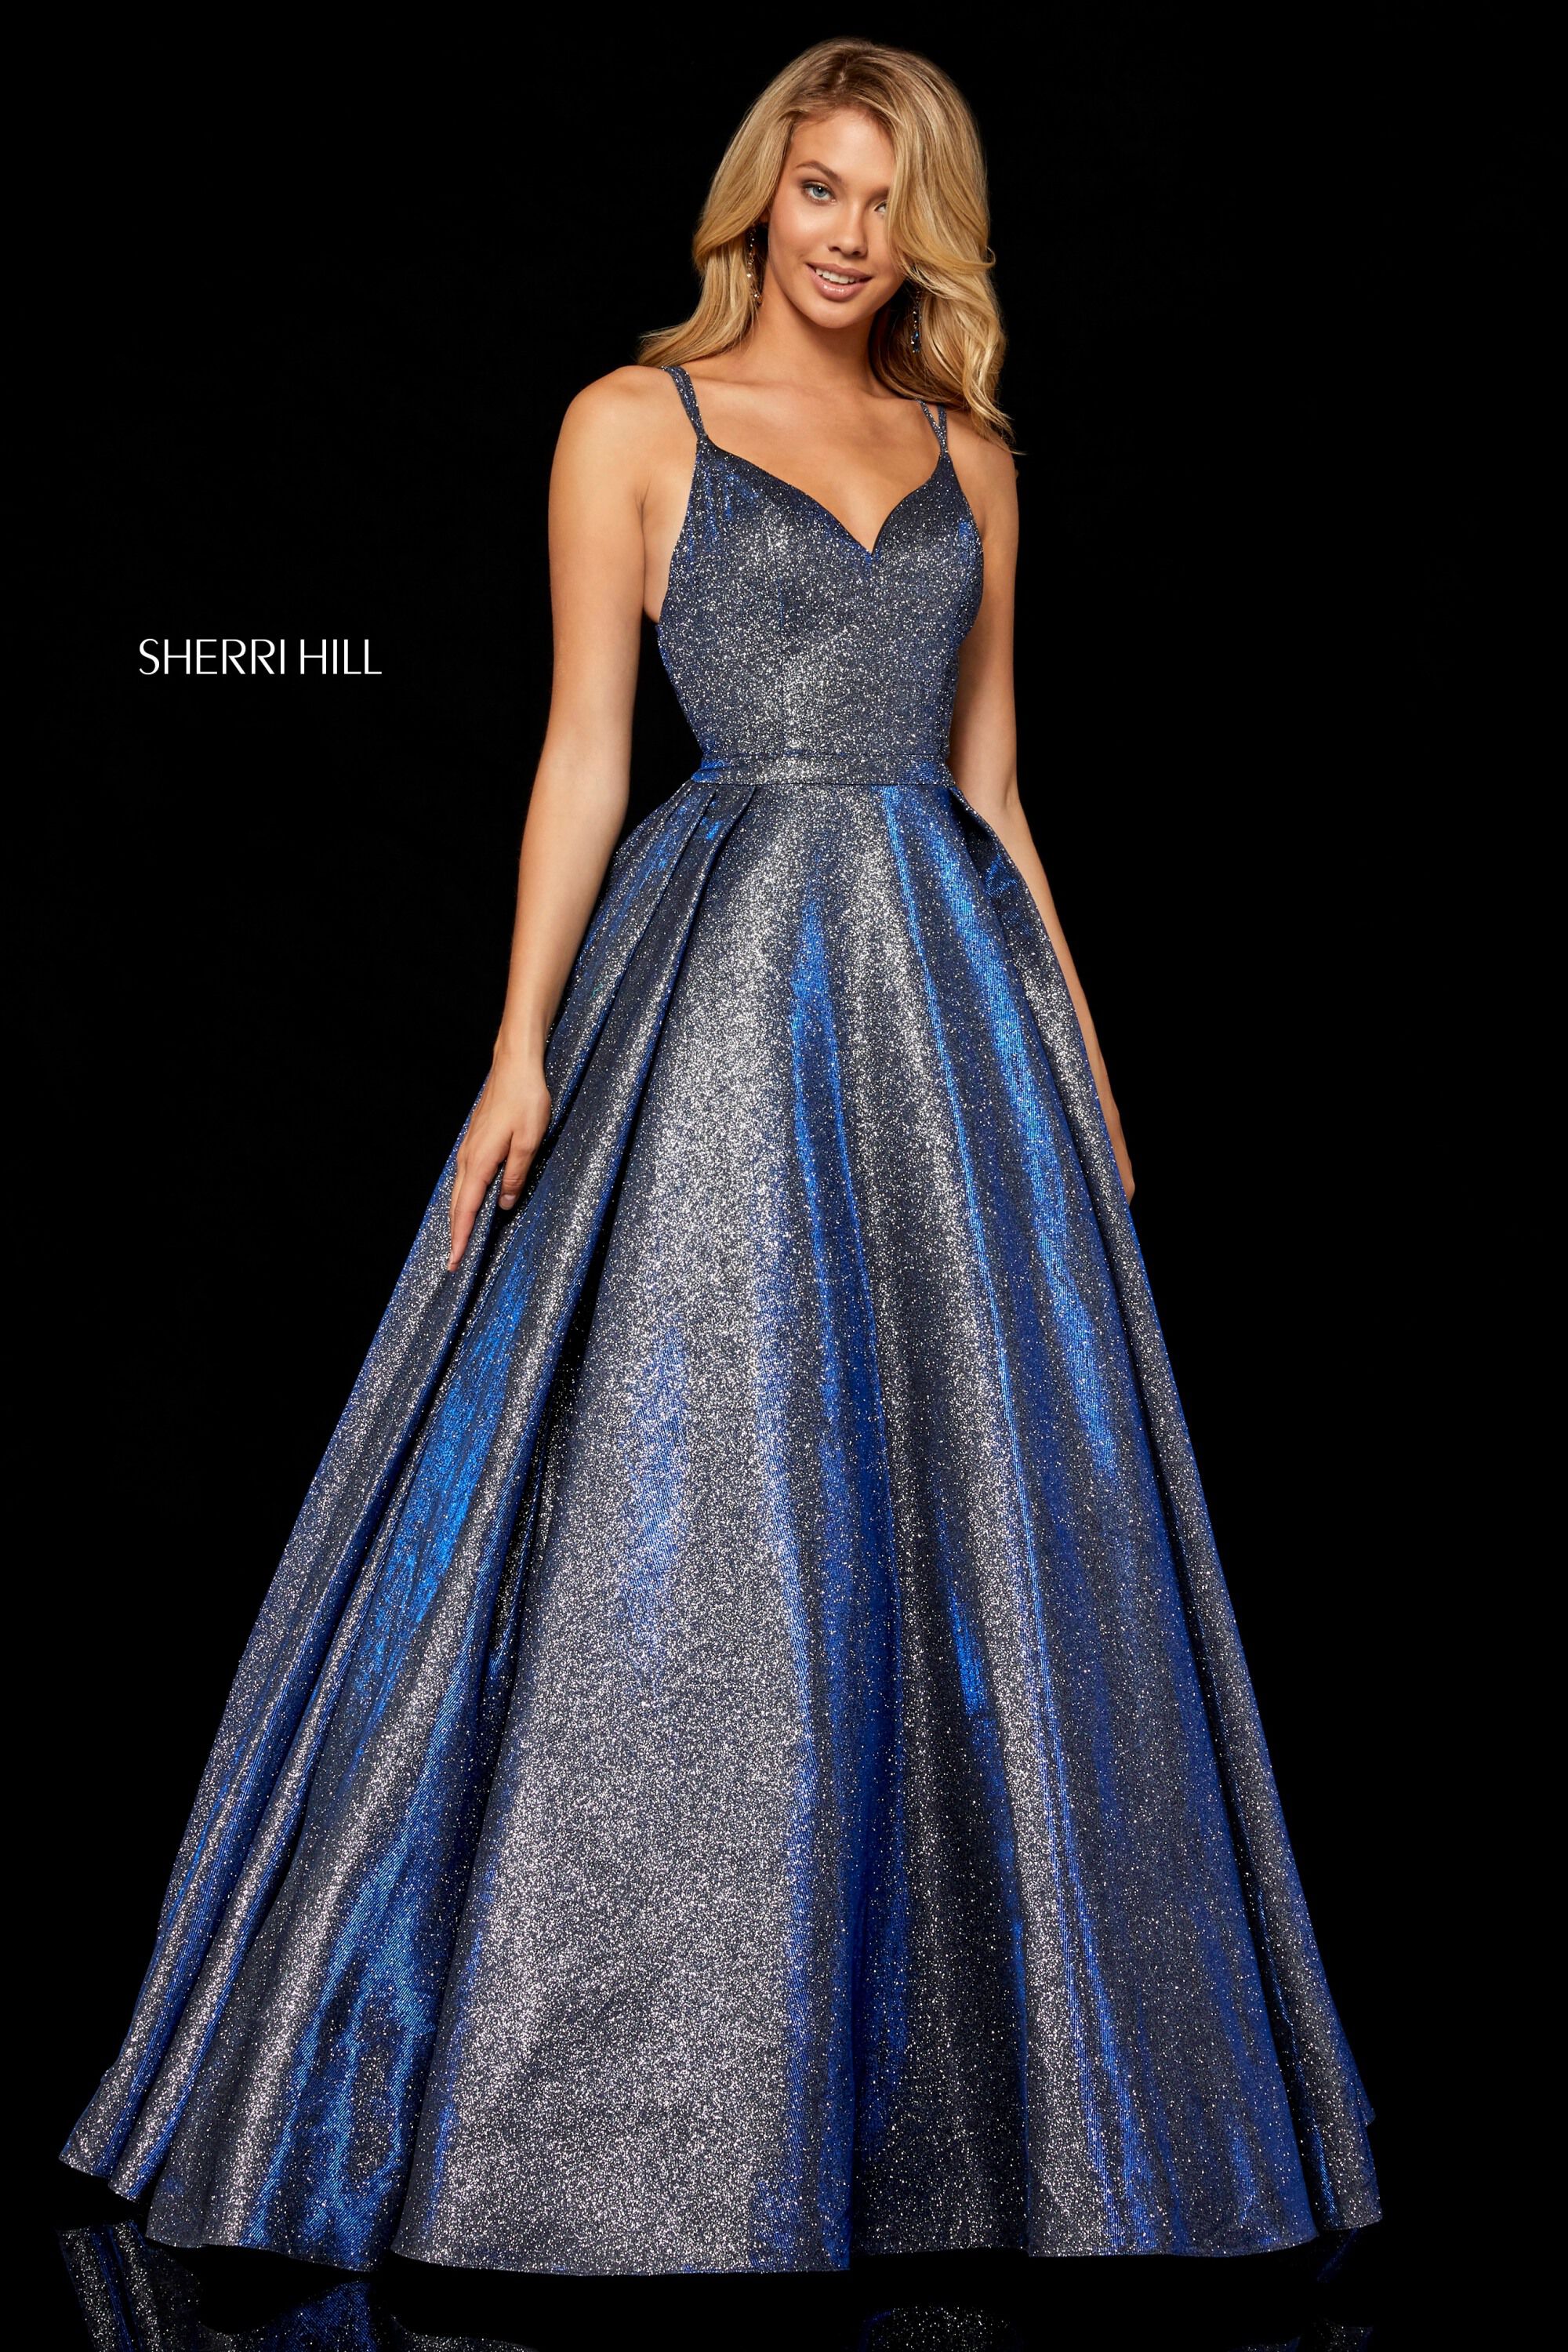 style № 52364 designed by SherriHill